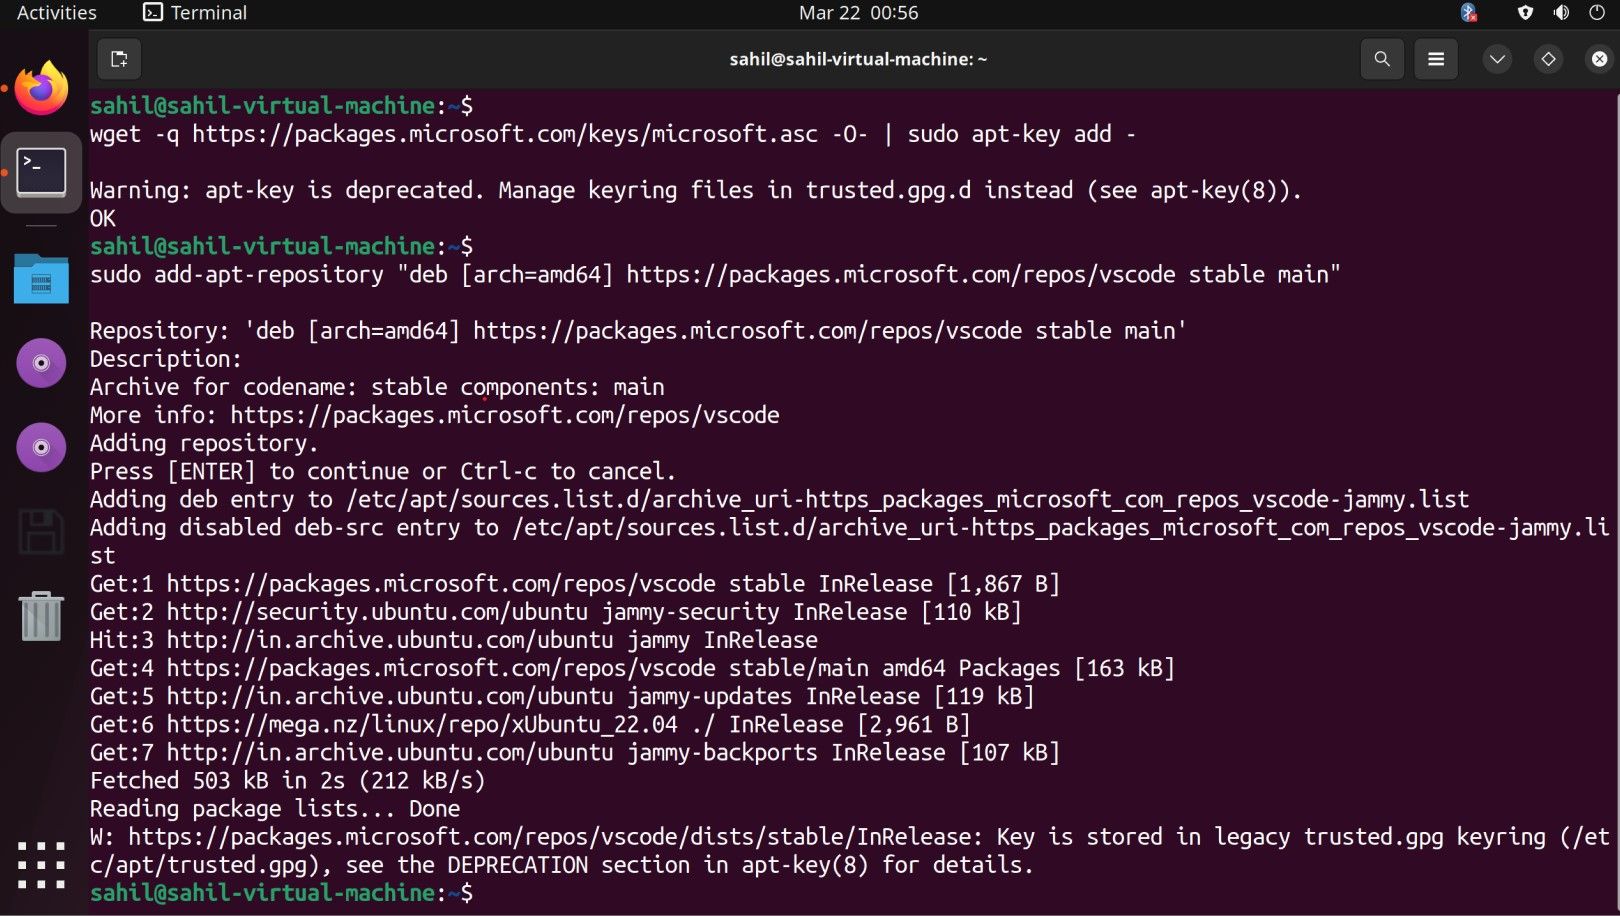 Ubuntu terminal window with code snippets to enable VSC repository